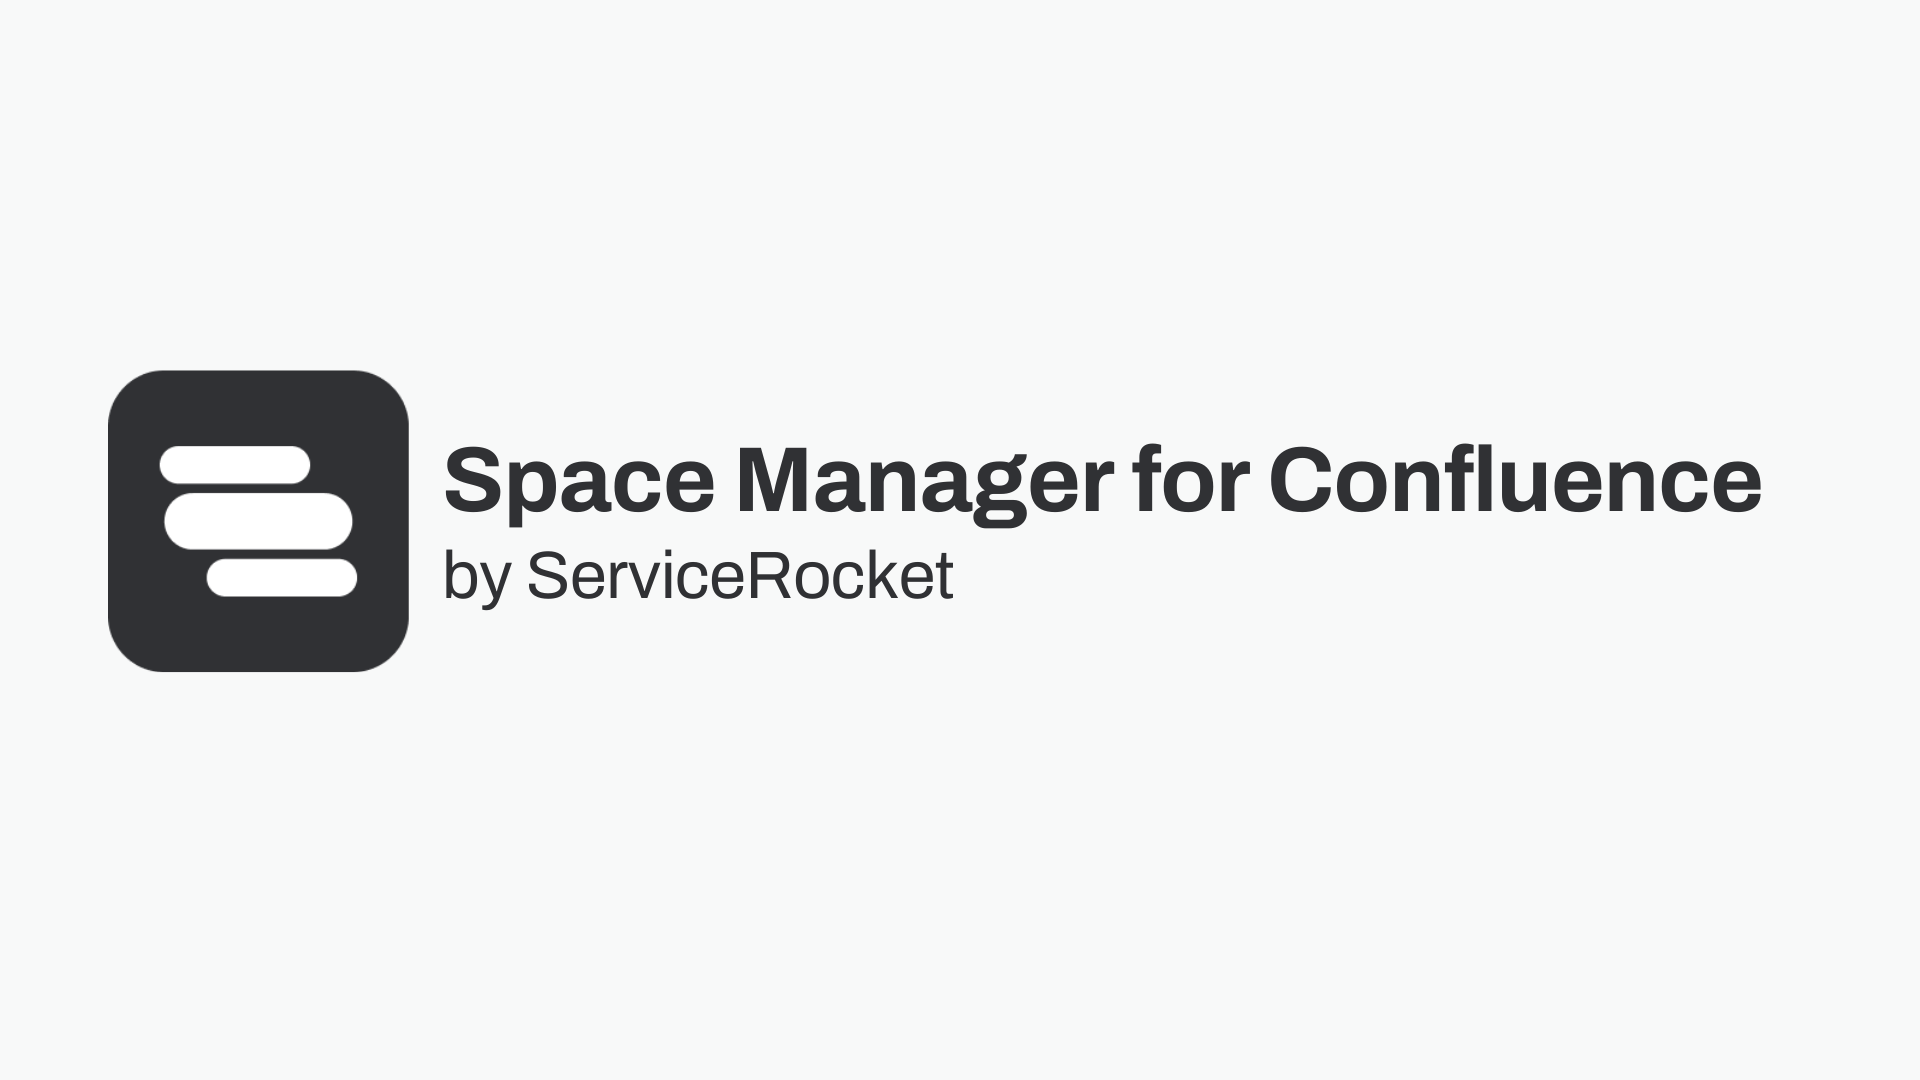 Space Manager for Confluence